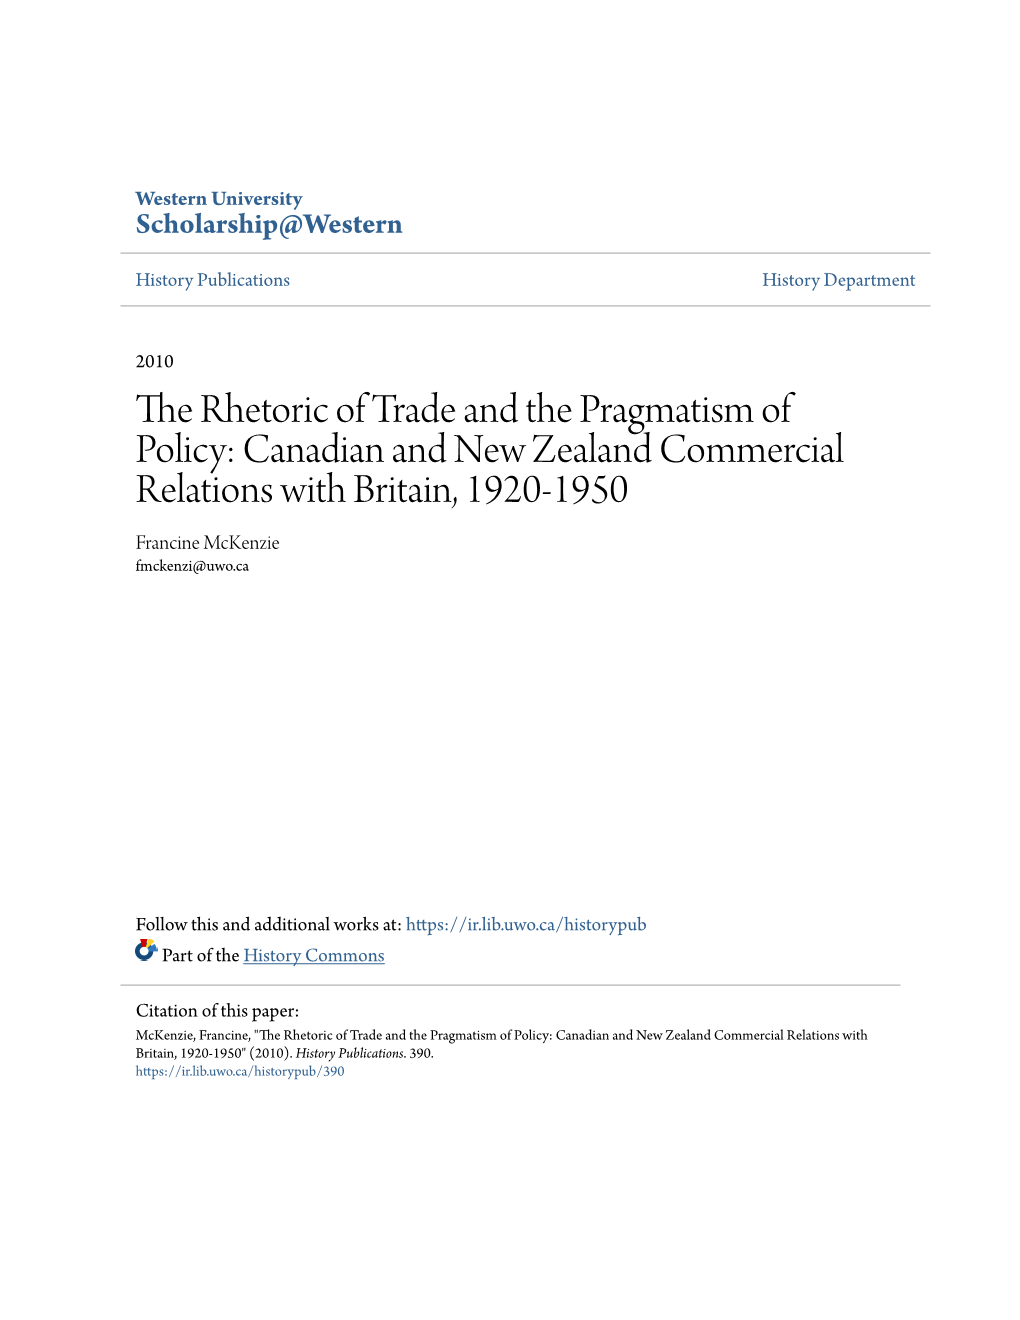 The Rhetoric of Trade and the Pragmatism of Policy: Canadian and New Zealand Commercial Relations with Britain, 1920-1950 Francine Mckenzie Fmckenzi@Uwo.Ca